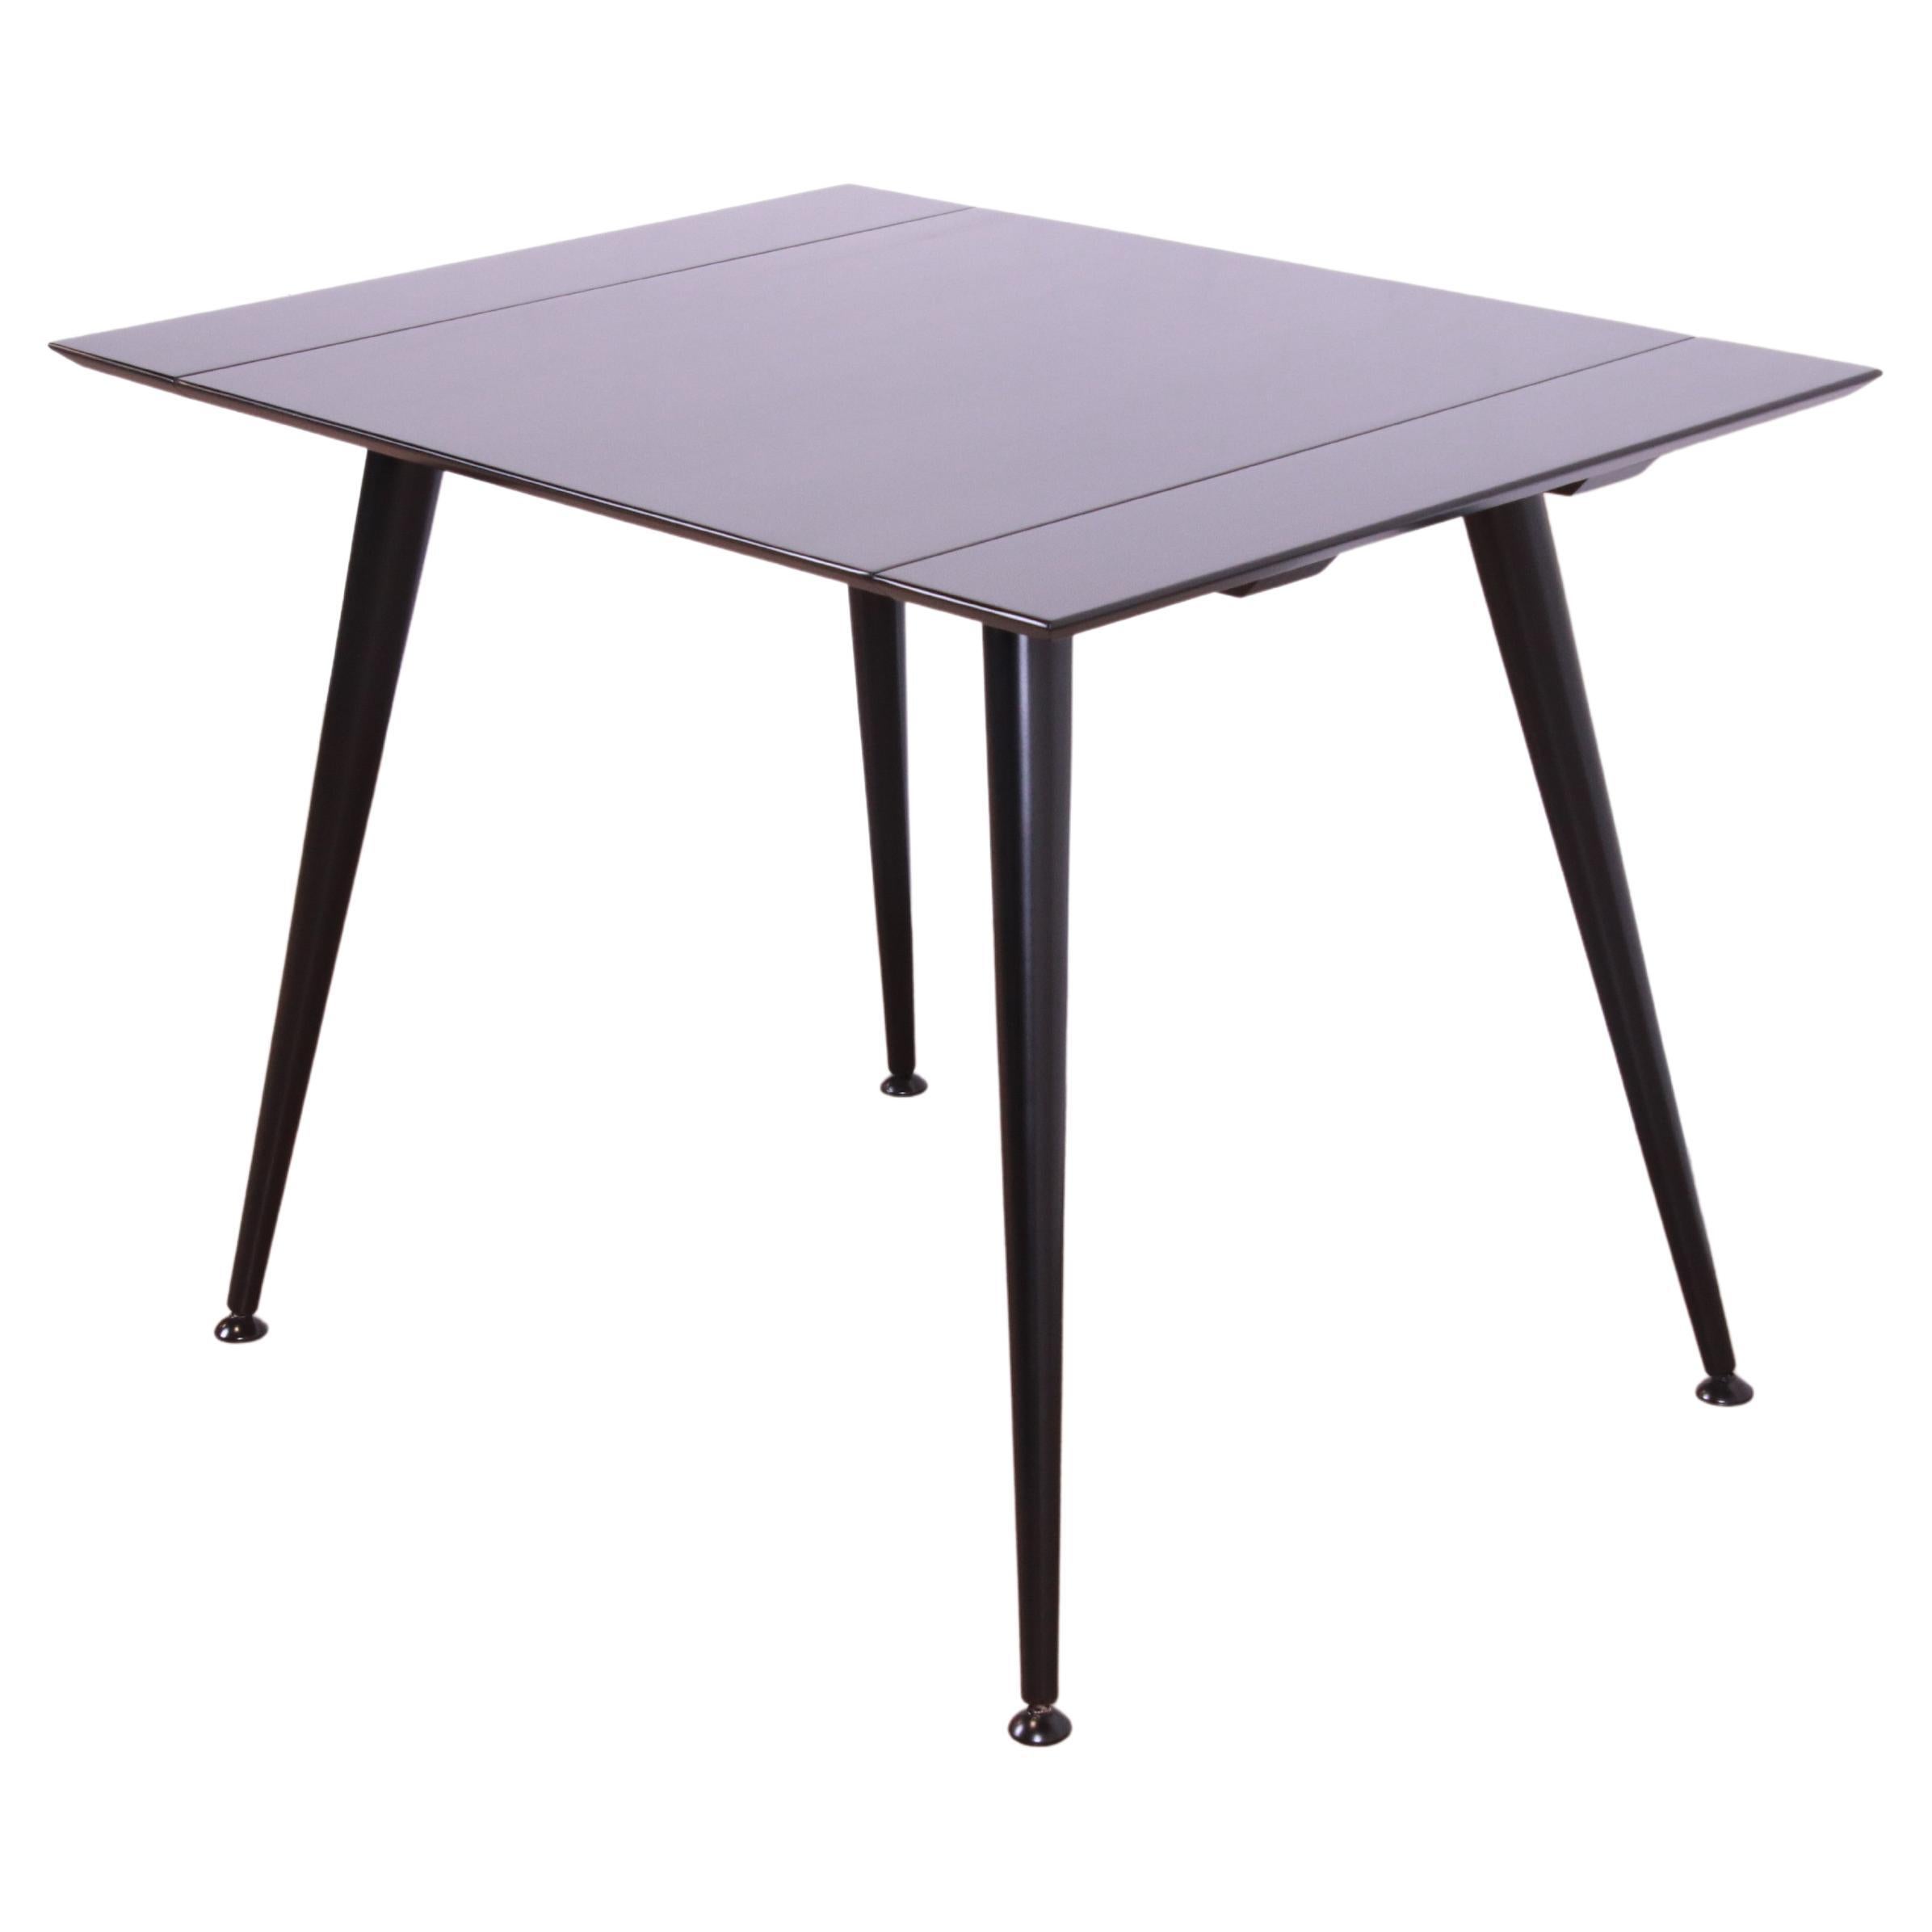 Paul McCobb Planner Group Black Lacquered Extension Dinette Table, Refinished